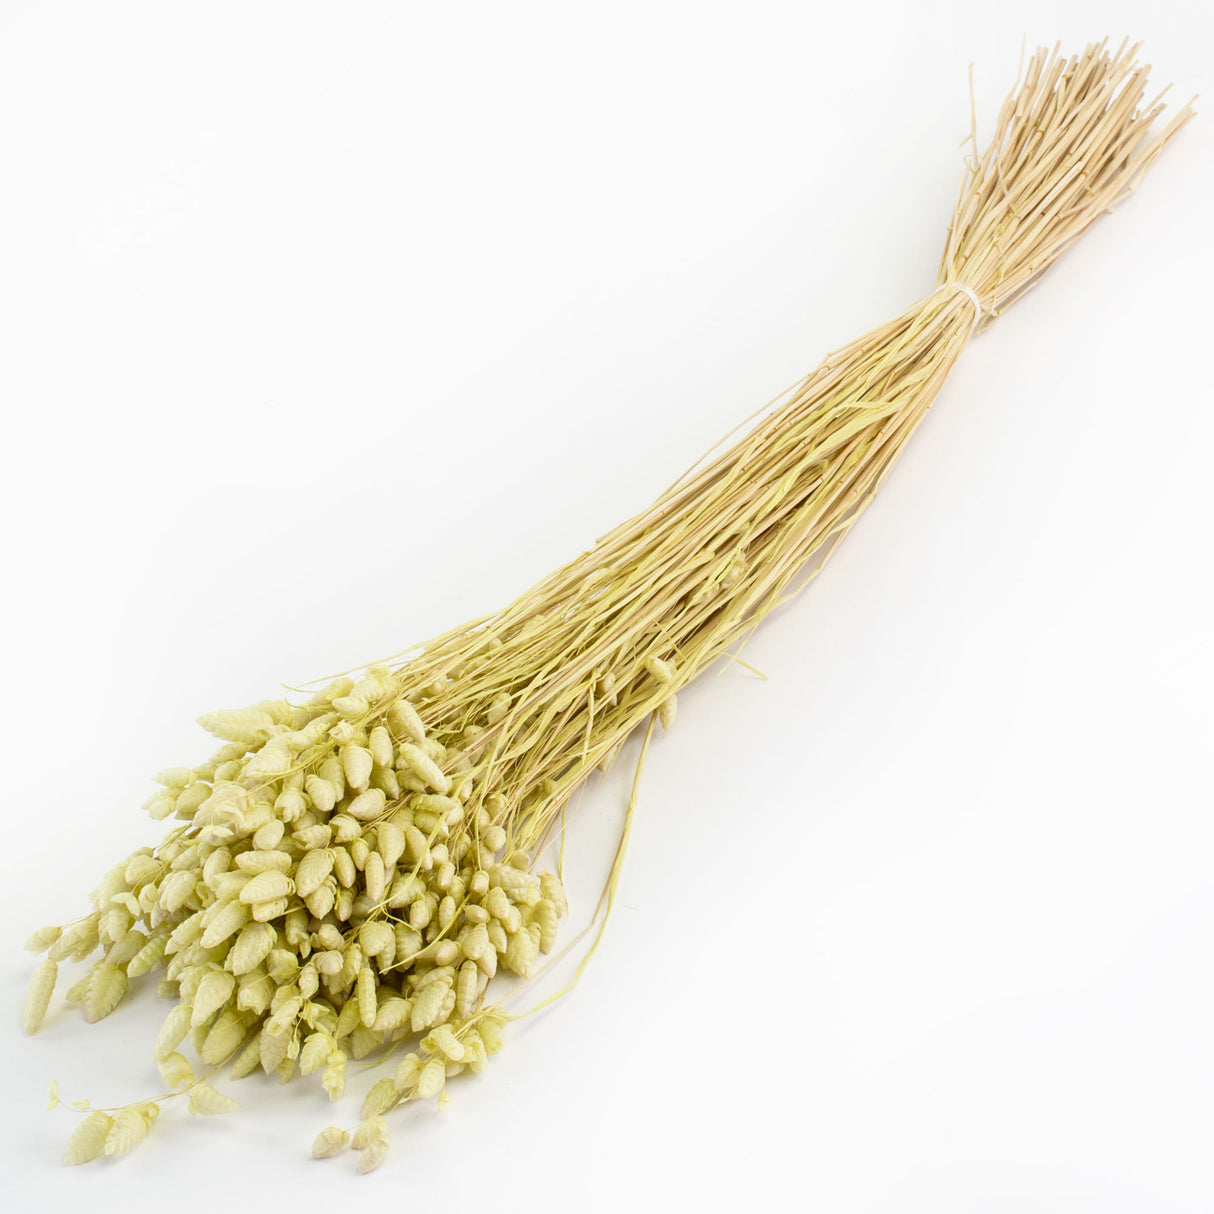 This image shows a bunch of misty green briza maxima against a white background